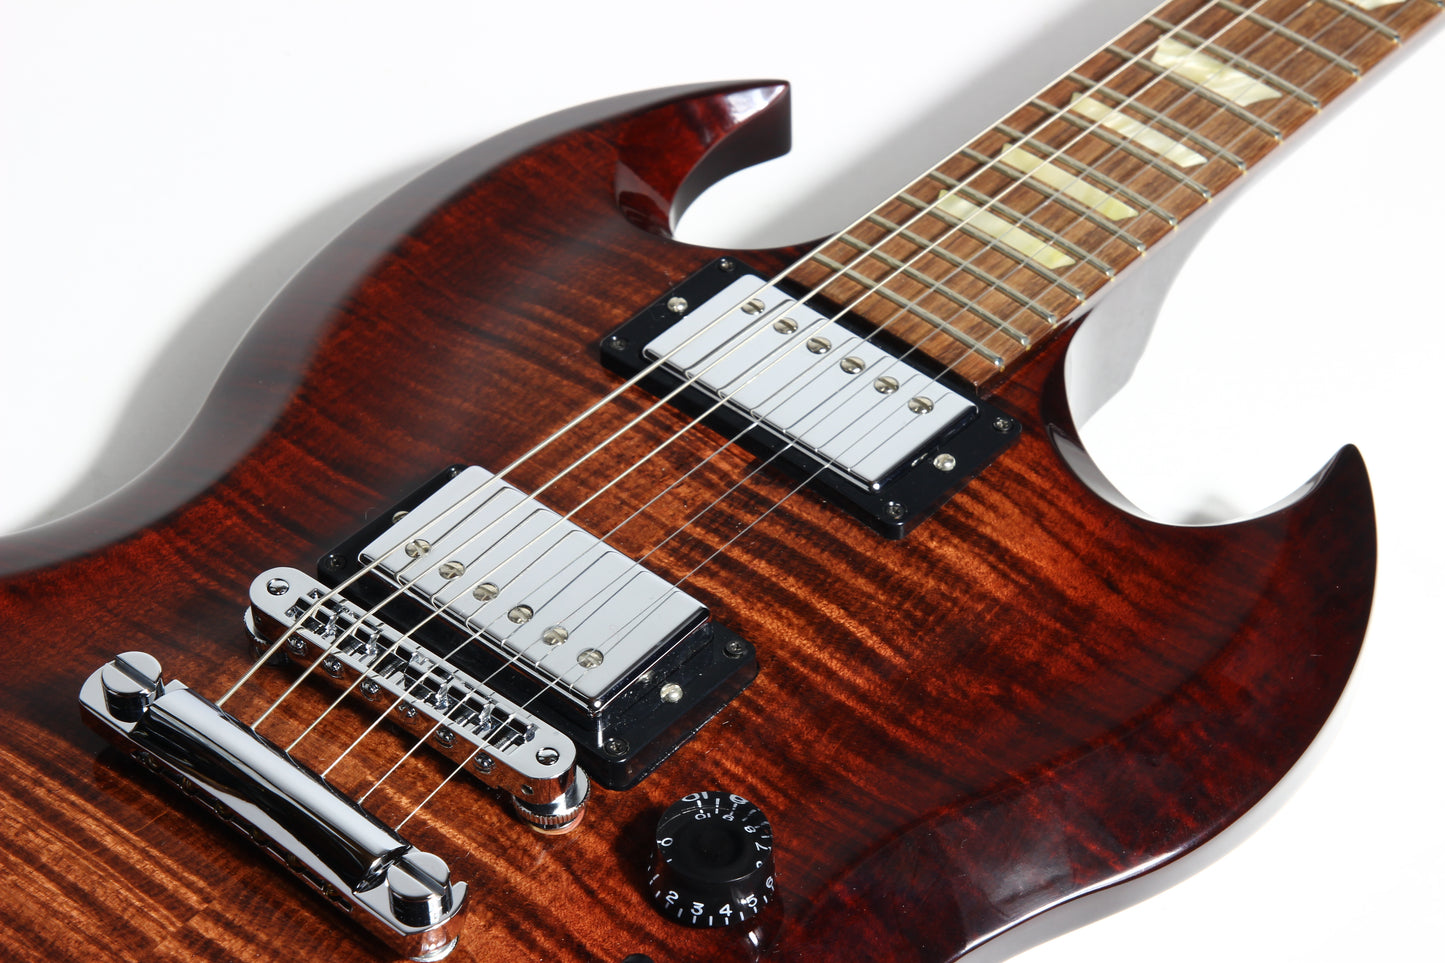 MINT! 2009 Gibson Limited Run SG Carved Top Guitar of the Month GOTM Flametop - Autumn Burst, supreme standard diablo